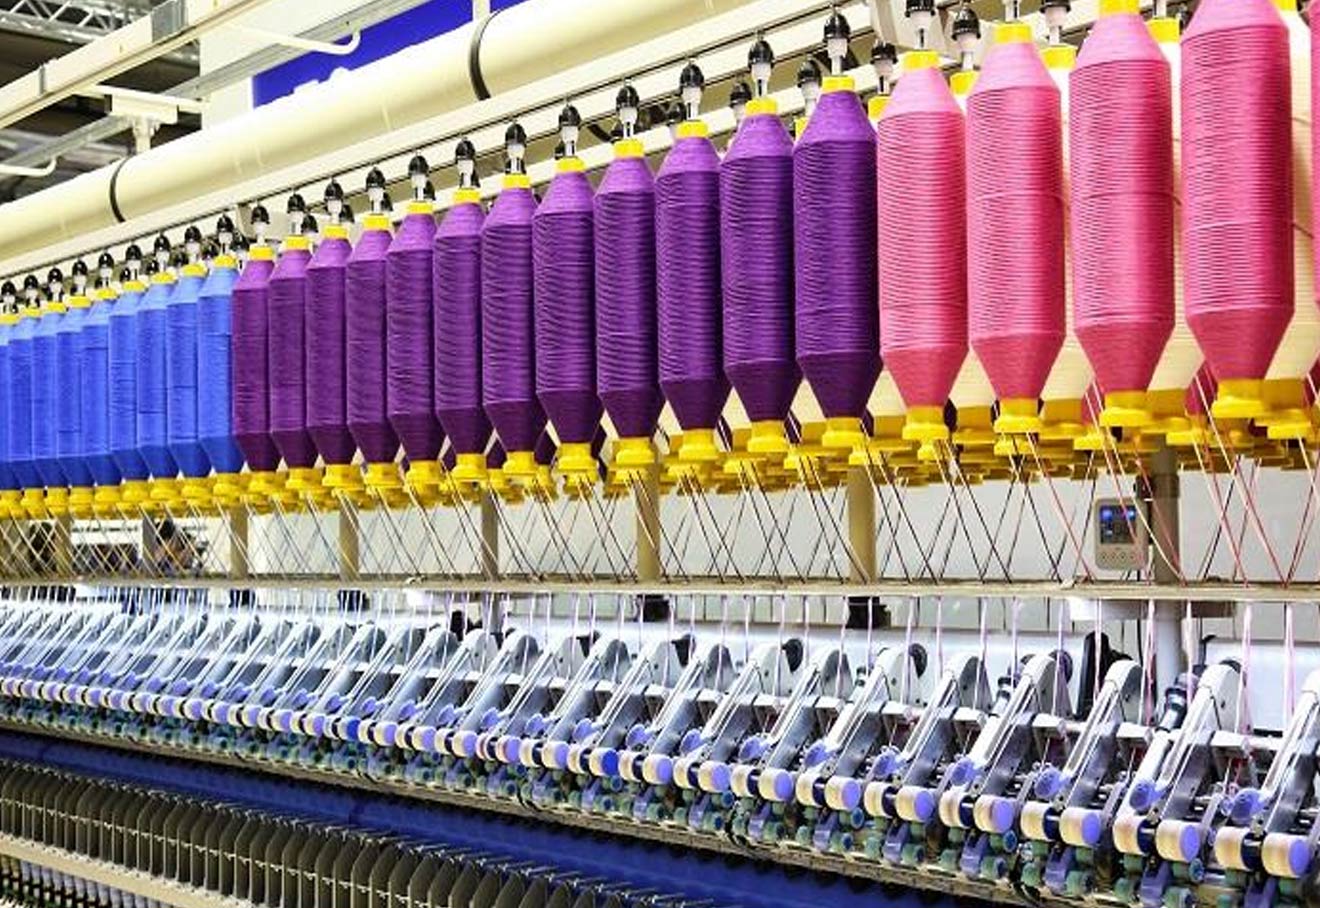 Bihar Govt Invites Bangladesh’s Textile Industry To Invest In State